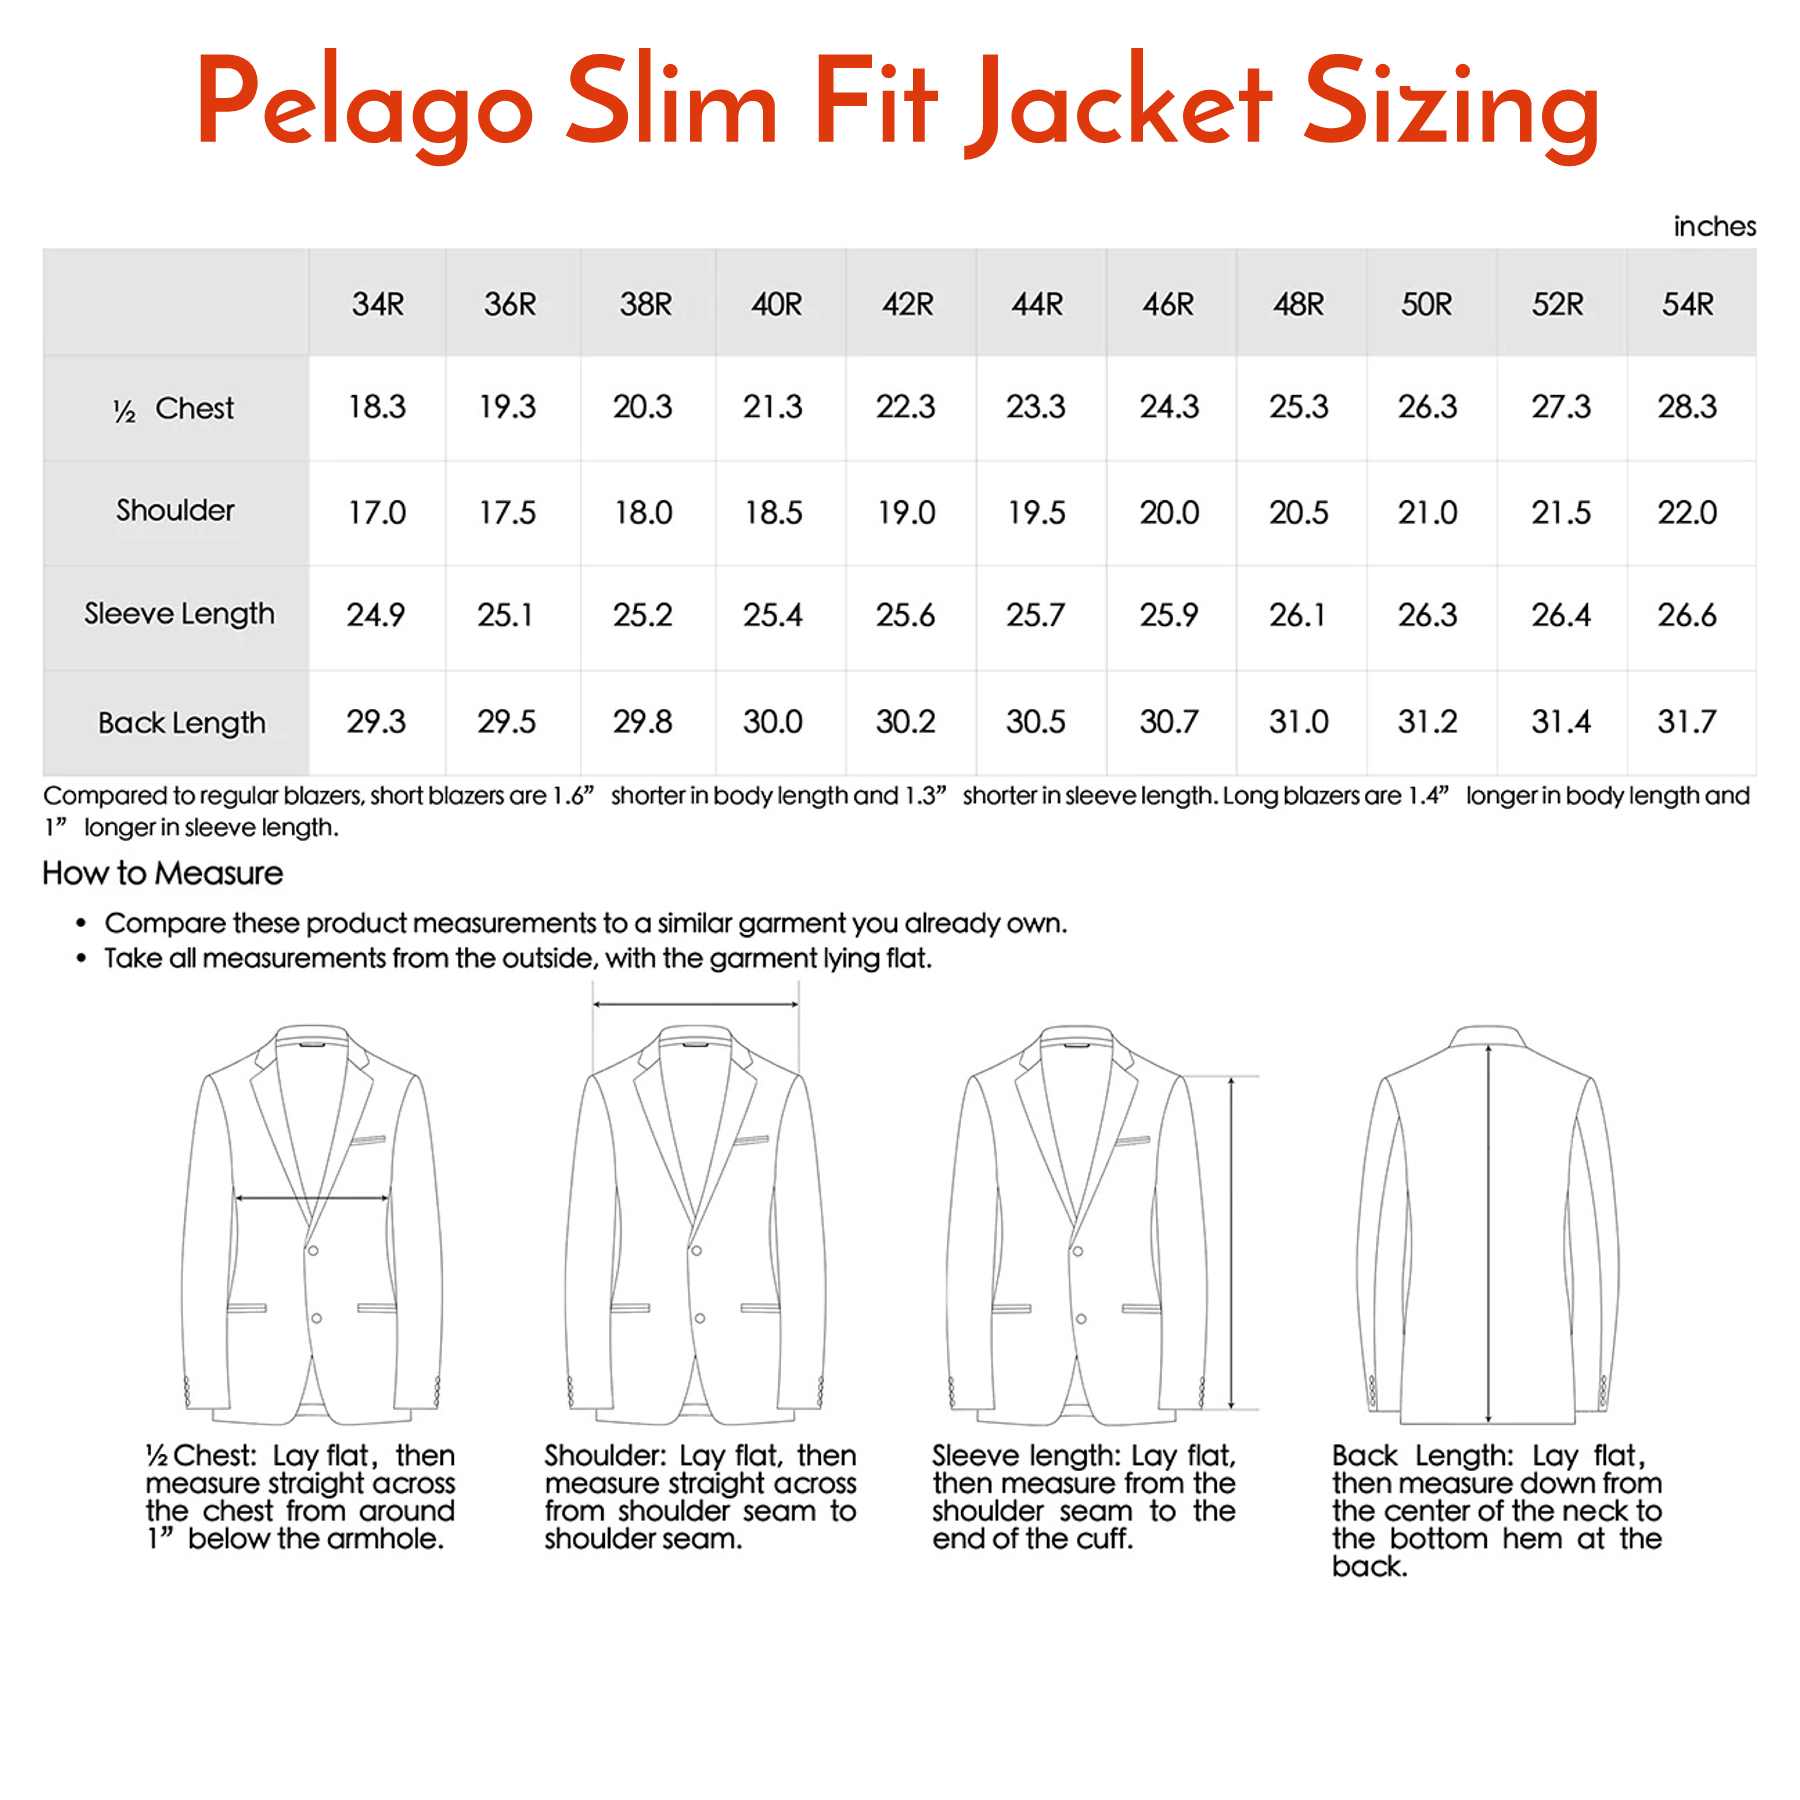 Single Breasted SLIM FIT Half Canvas Soft Jacket in Grey (Short, Regular, and Long Available) by Pelago